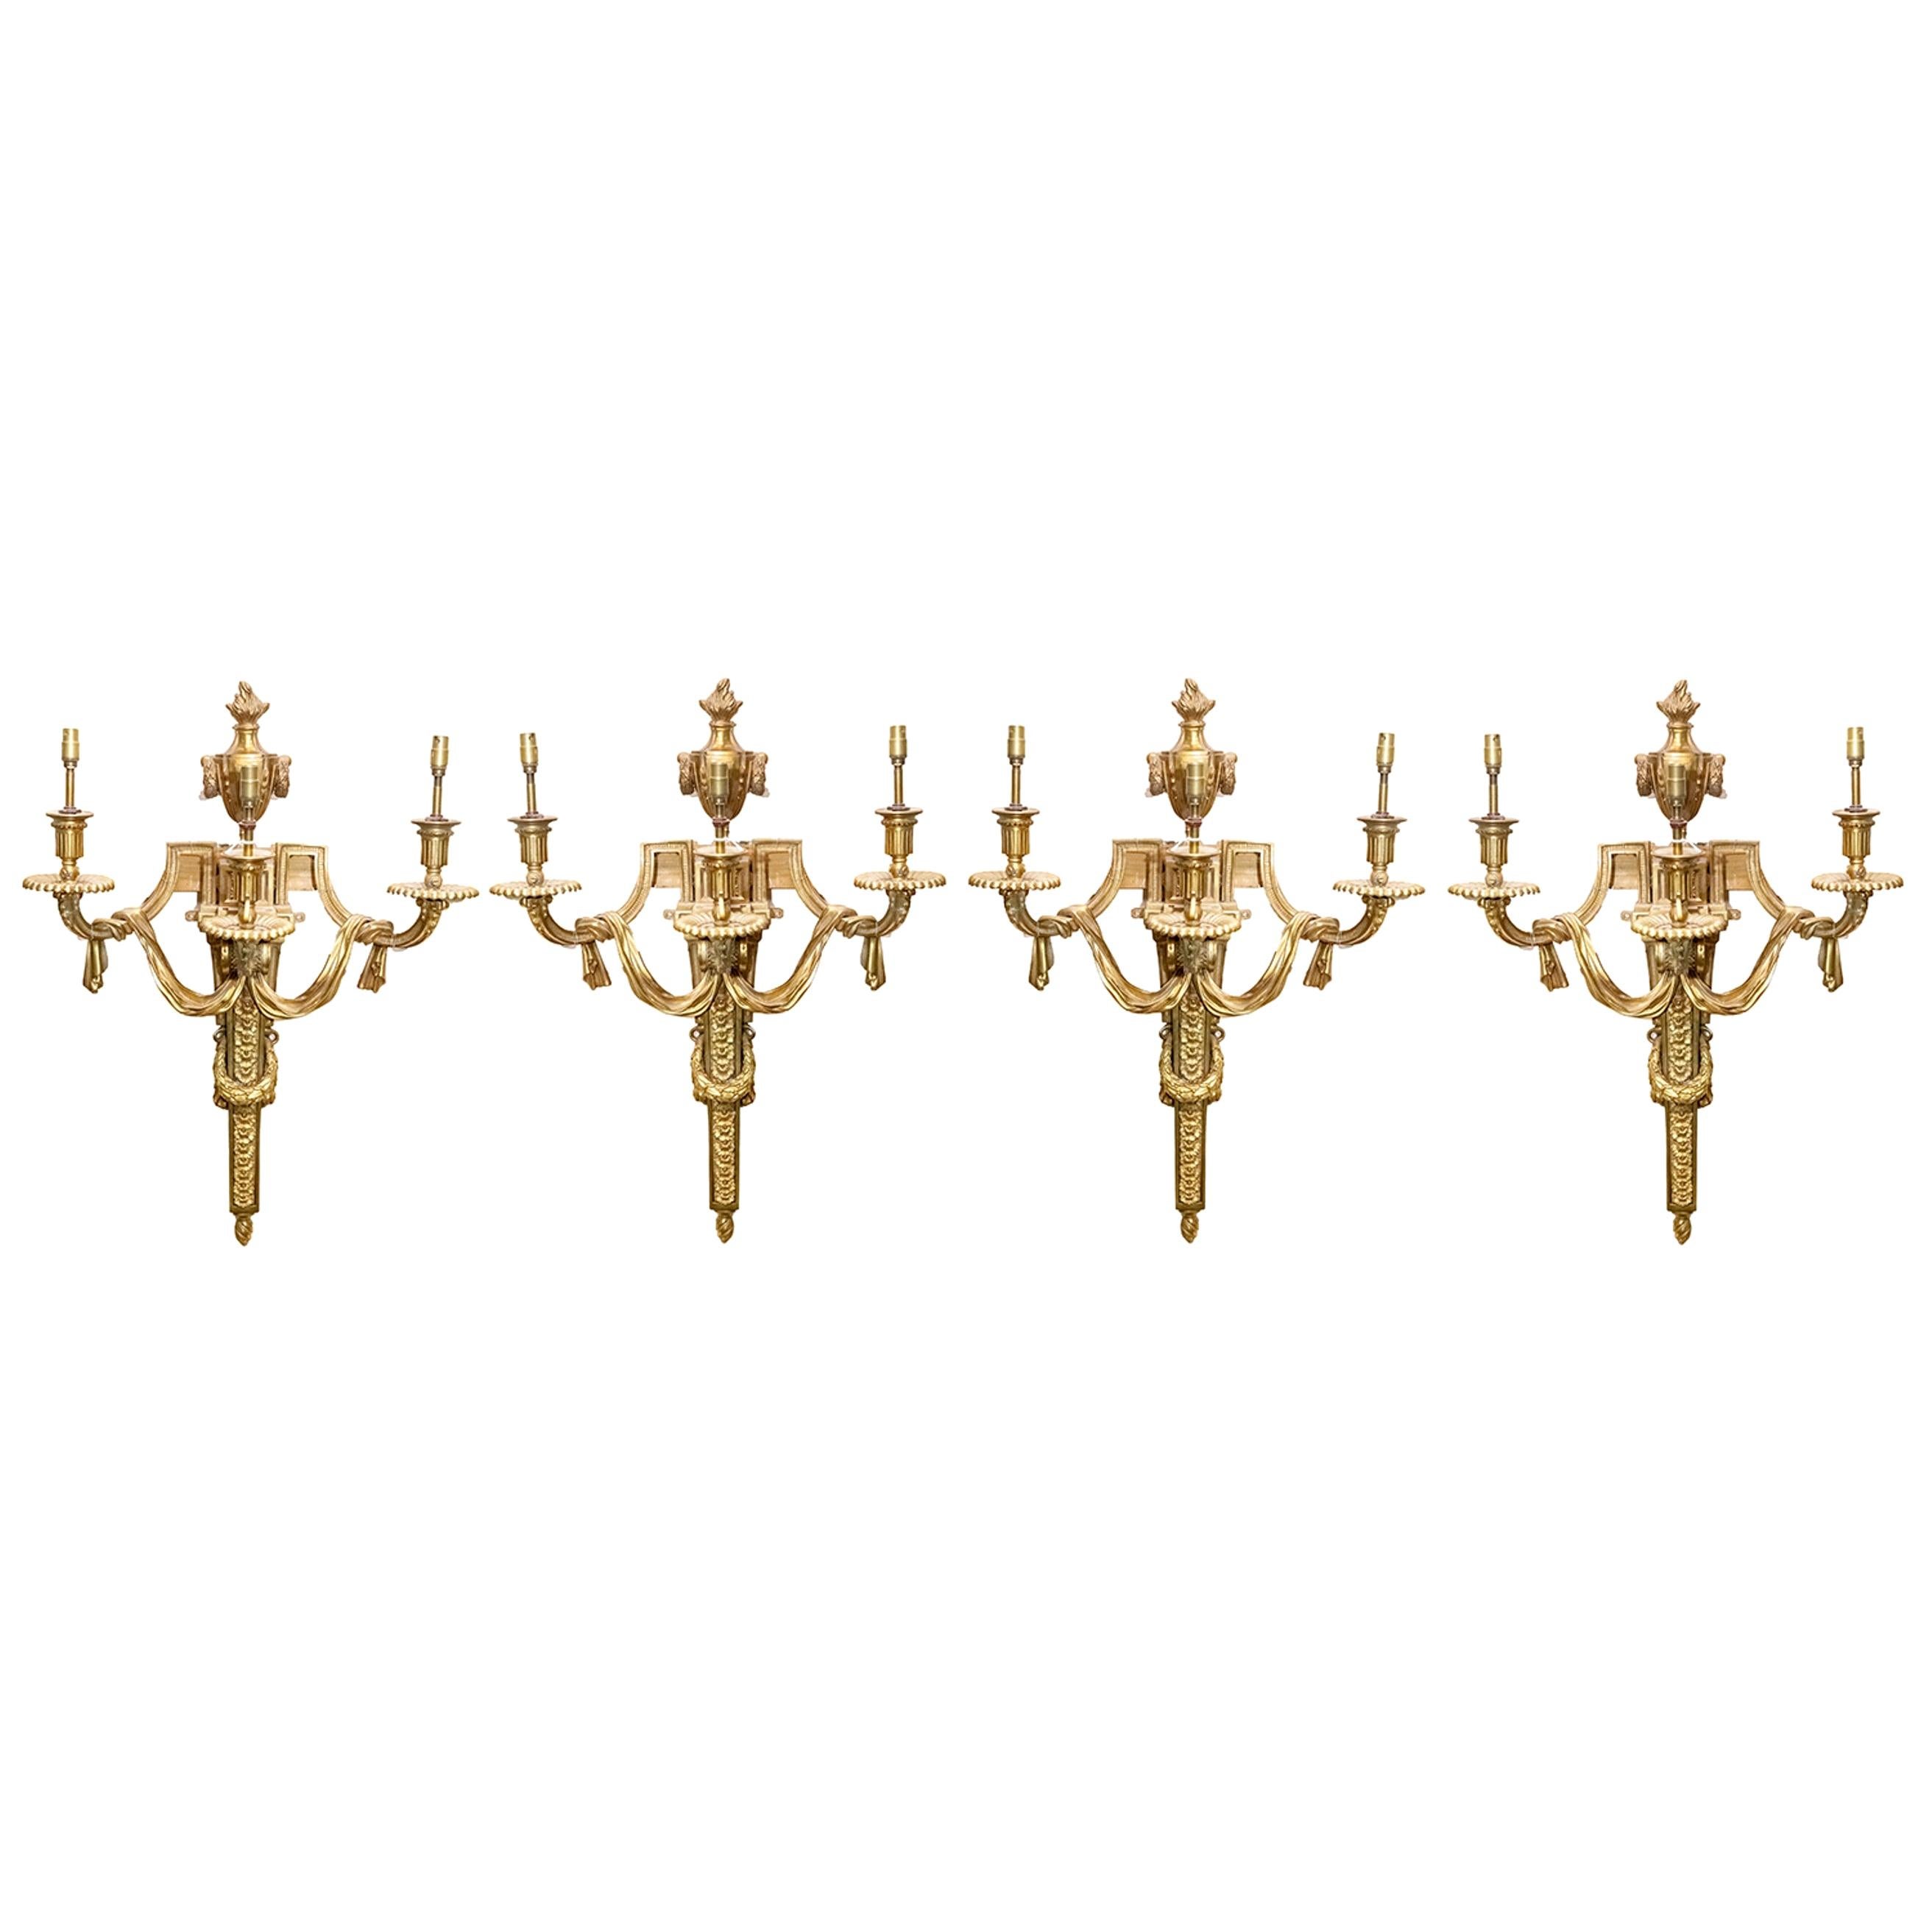 Four Classical French Louis XVI Style Ormolu Wall Lights, Late 19th Century